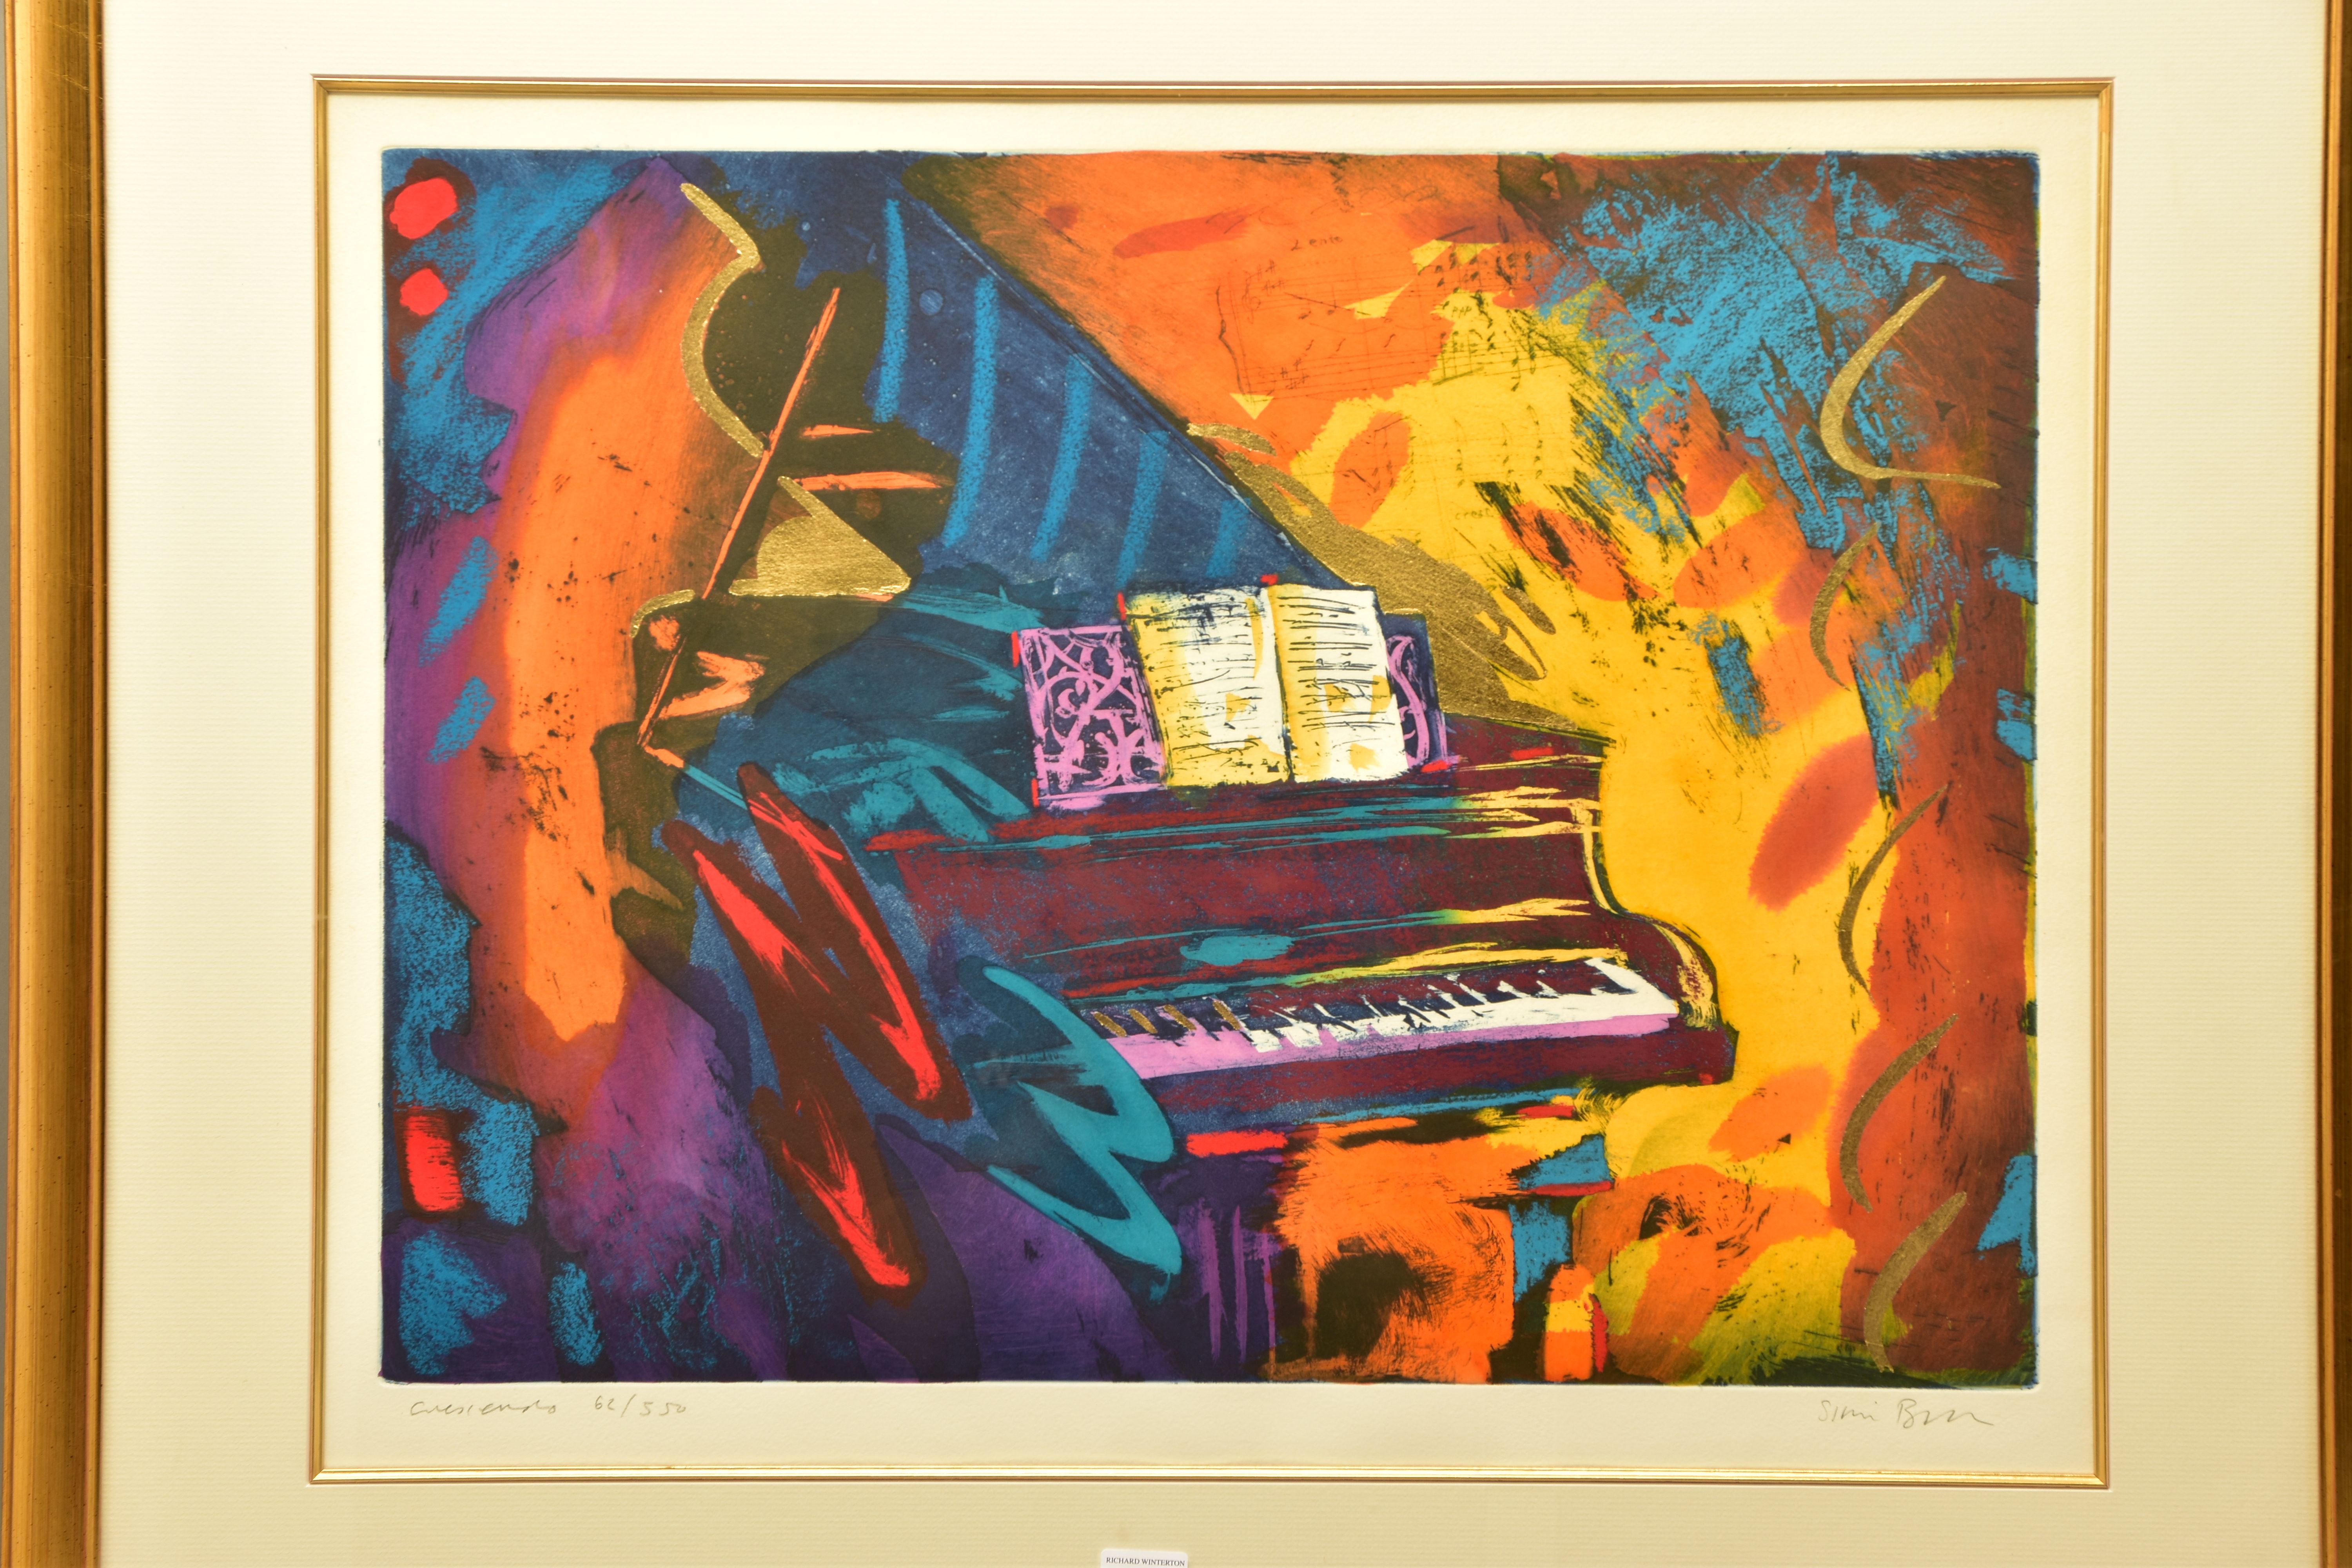 SIMON BULL (BRITISH 1958) 'CRESCENDO', a signed limited edition screen print depicting a concert - Image 2 of 9